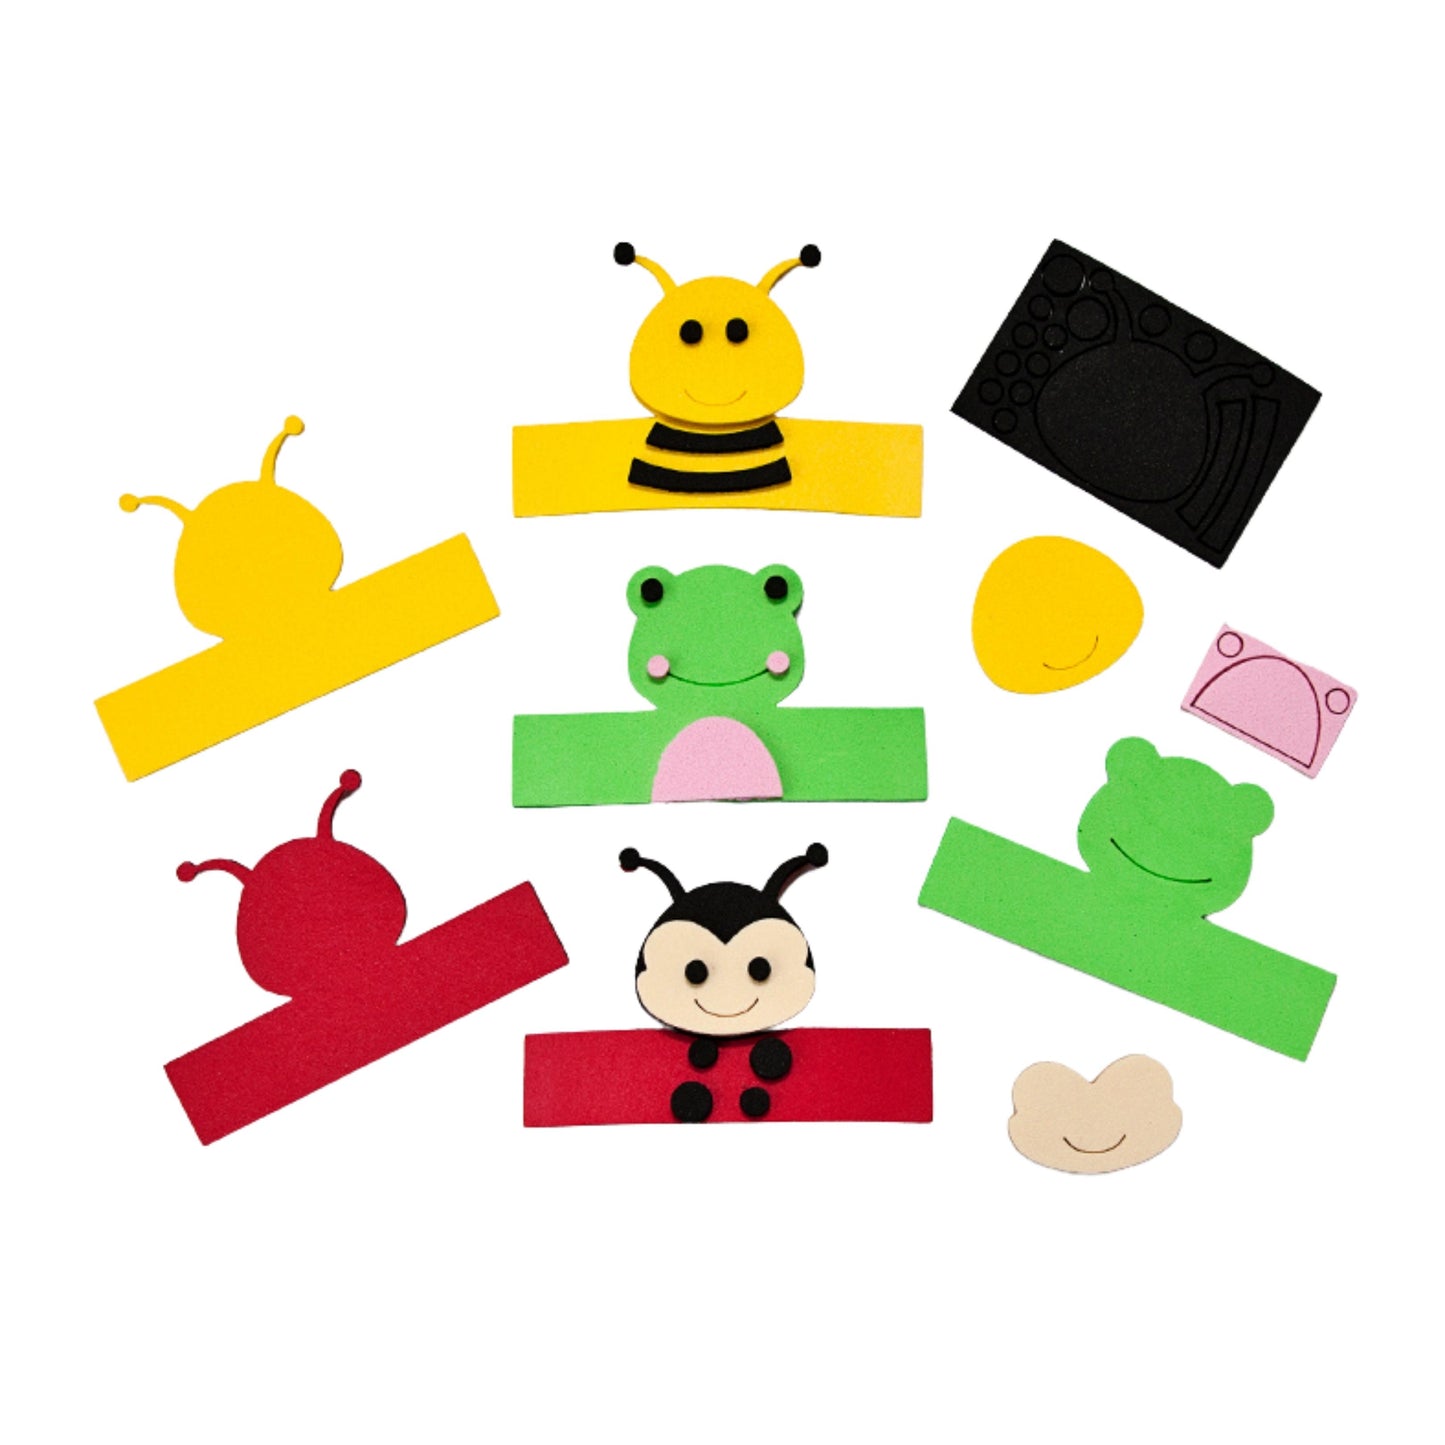 Make Your Own Finger Puppets - Little Creatures